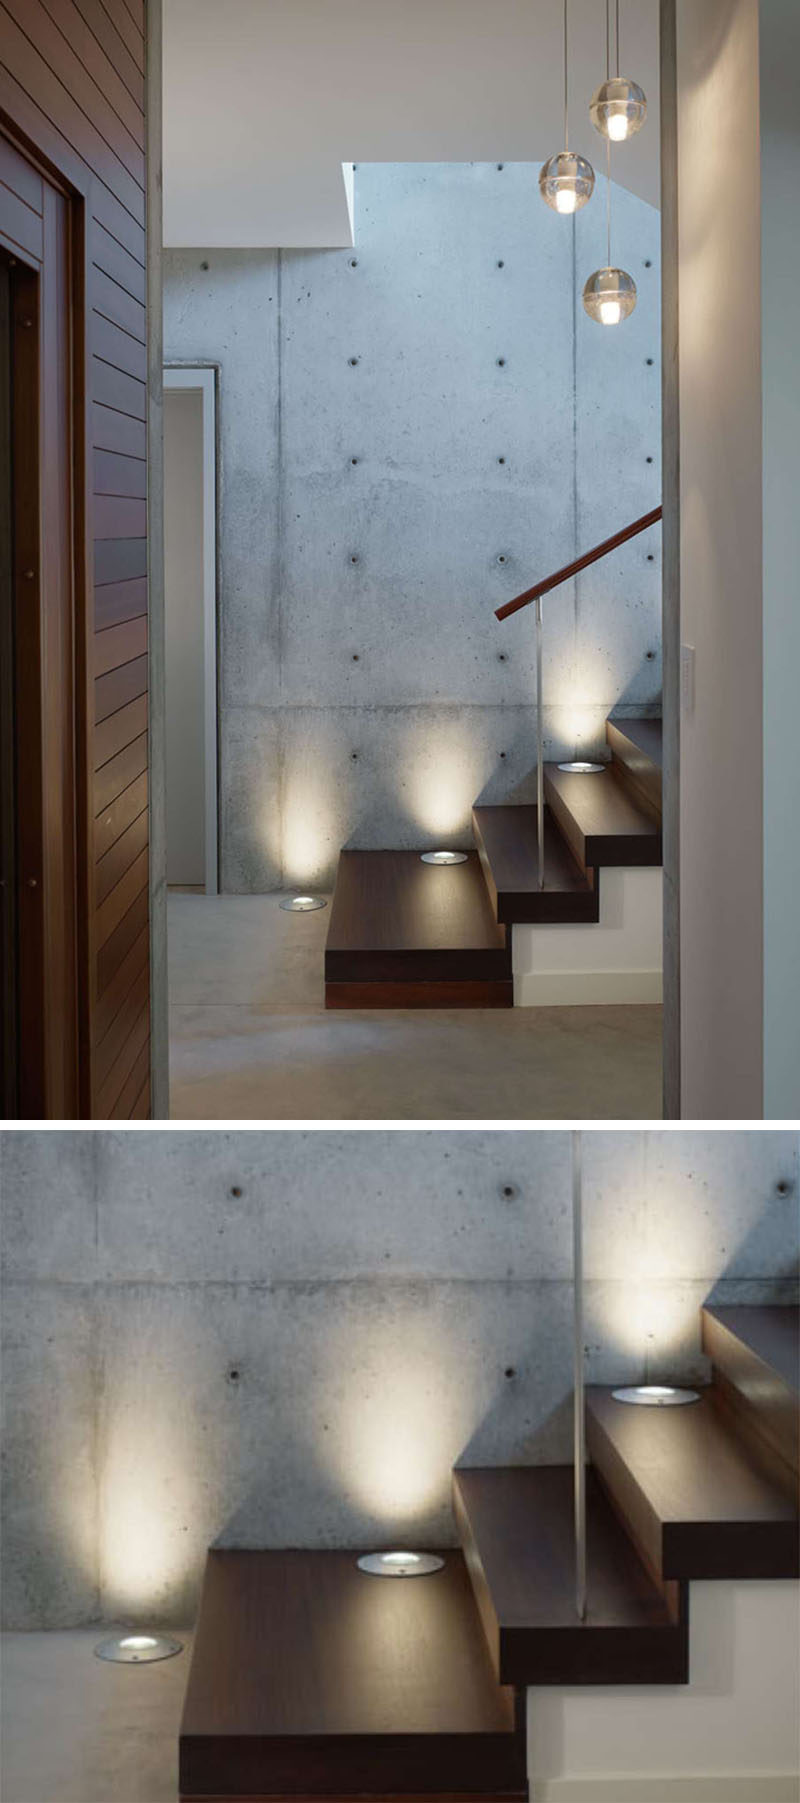 7 Interiors That Use Dramatic Uplighting To Brighten A Space // Embedded lights guide people up the stairs in this home, and add both style and safety elements to the staircase.